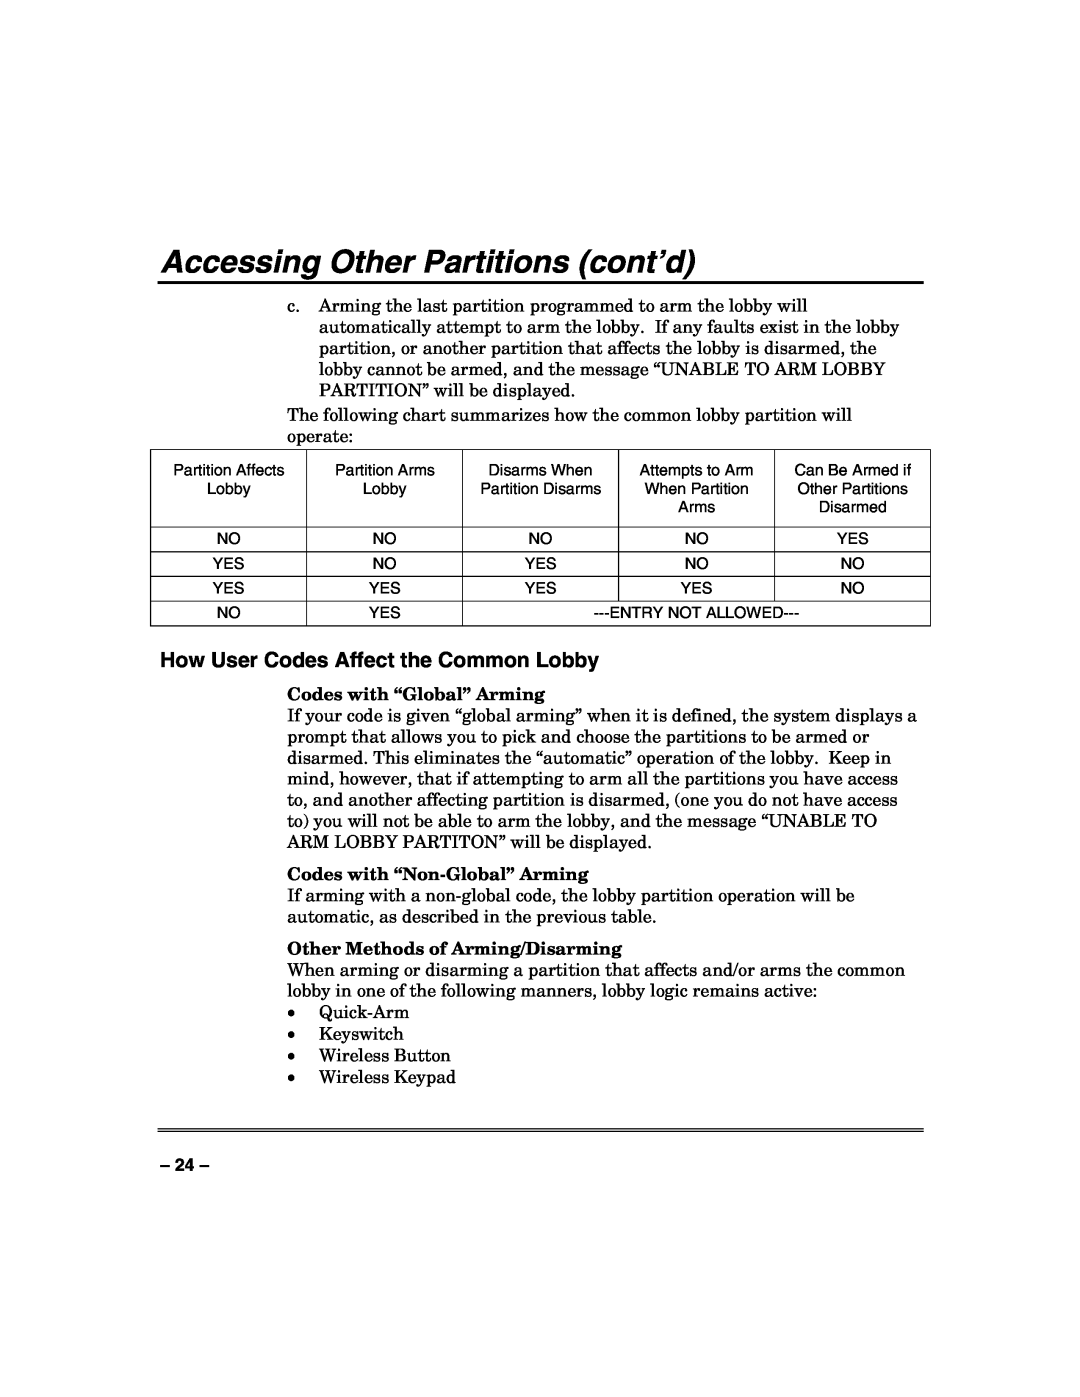 Honeywell VISTA-50PUL manual How User Codes Affect the Common Lobby, Accessing Other Partitions cont’d 